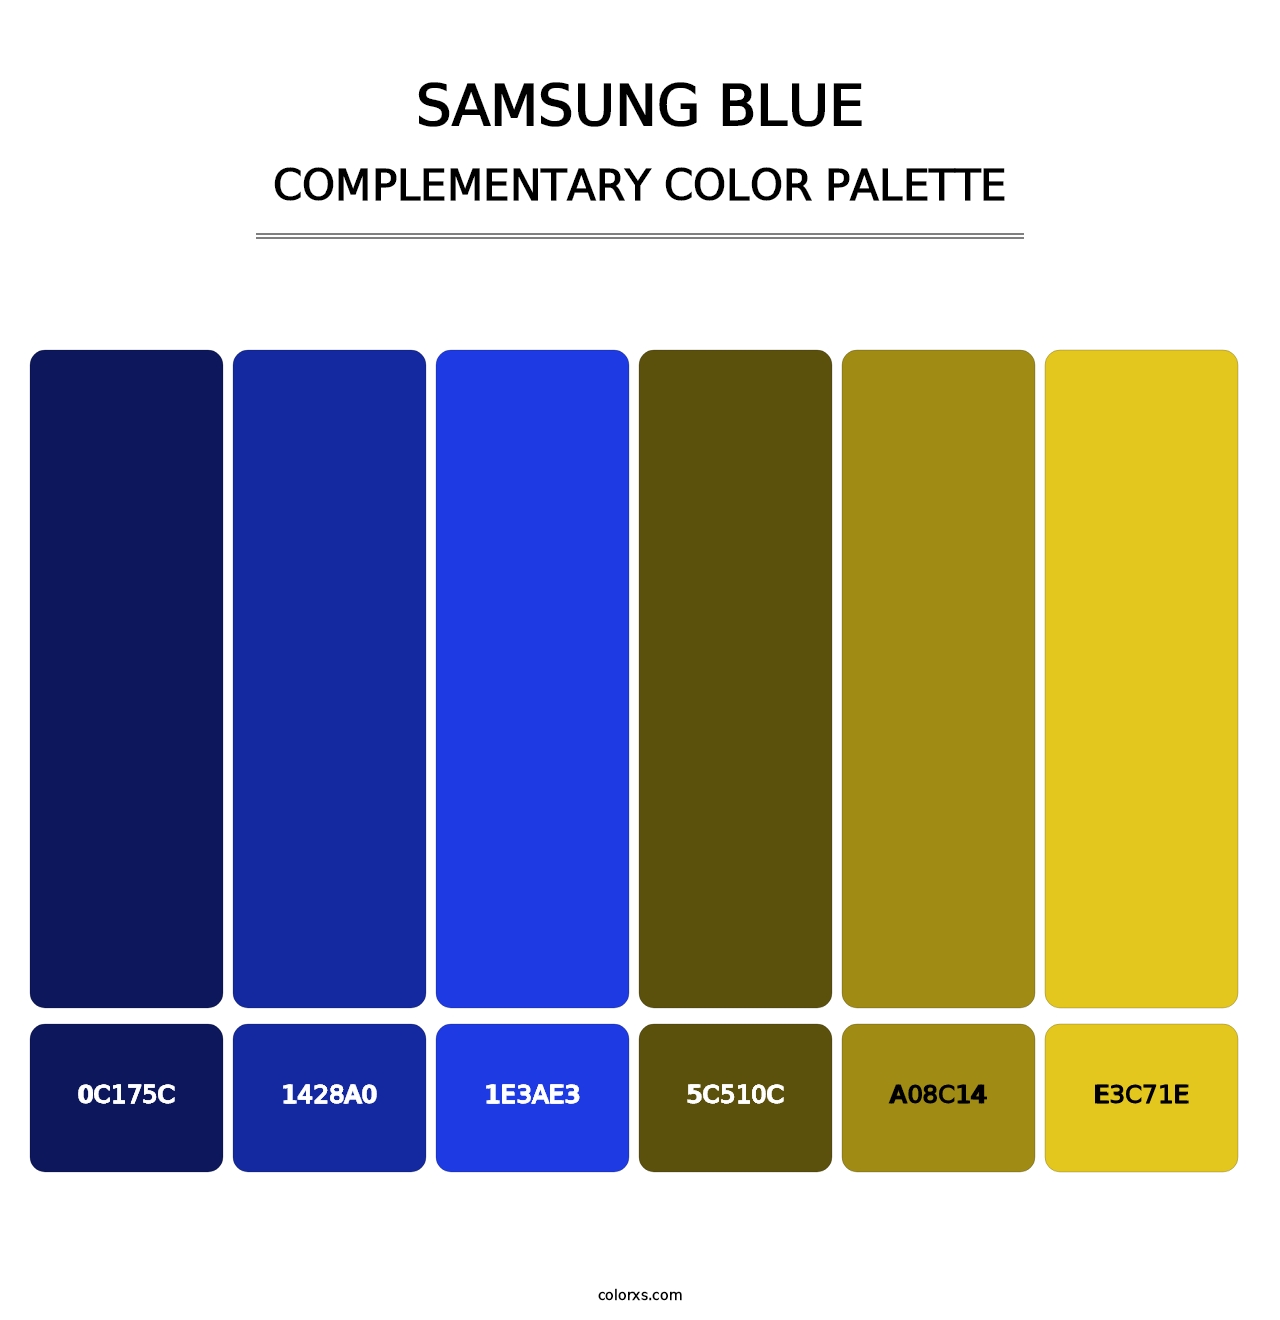 Samsung Blue - Complementary Color Palette